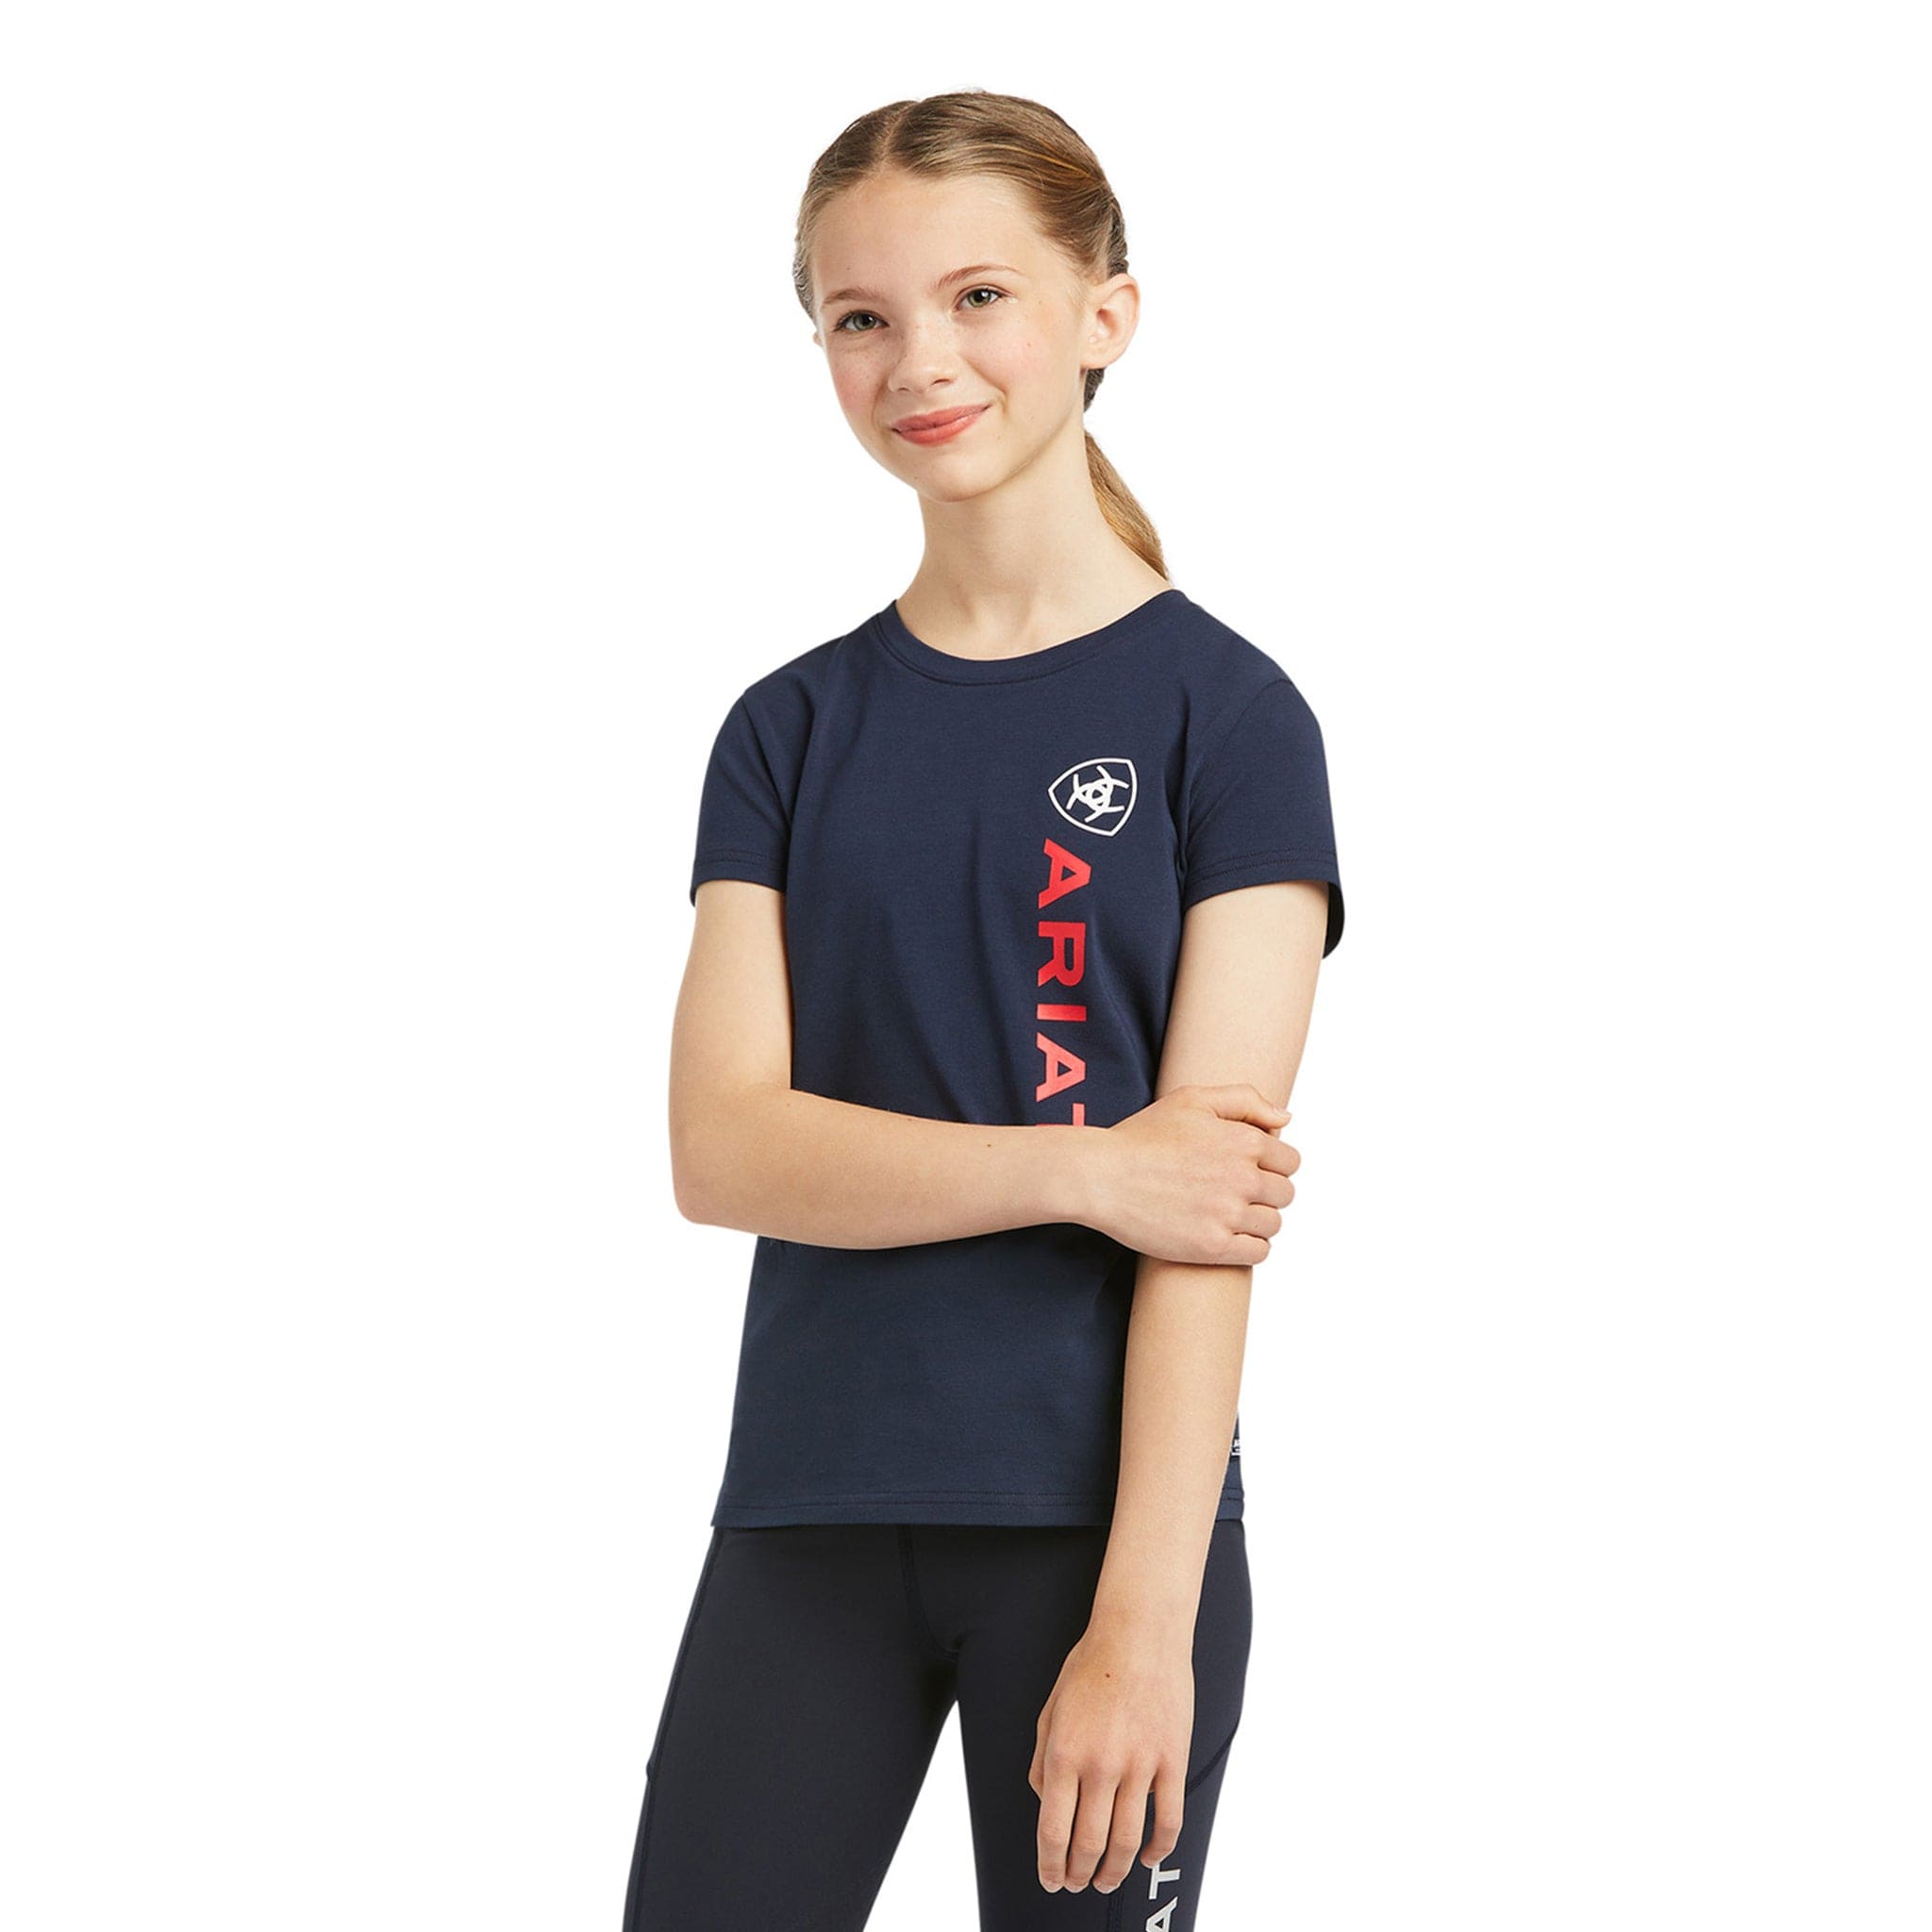 Ariat Youth Vertical Logo T-Shirt Navy 10039226 Front On Model